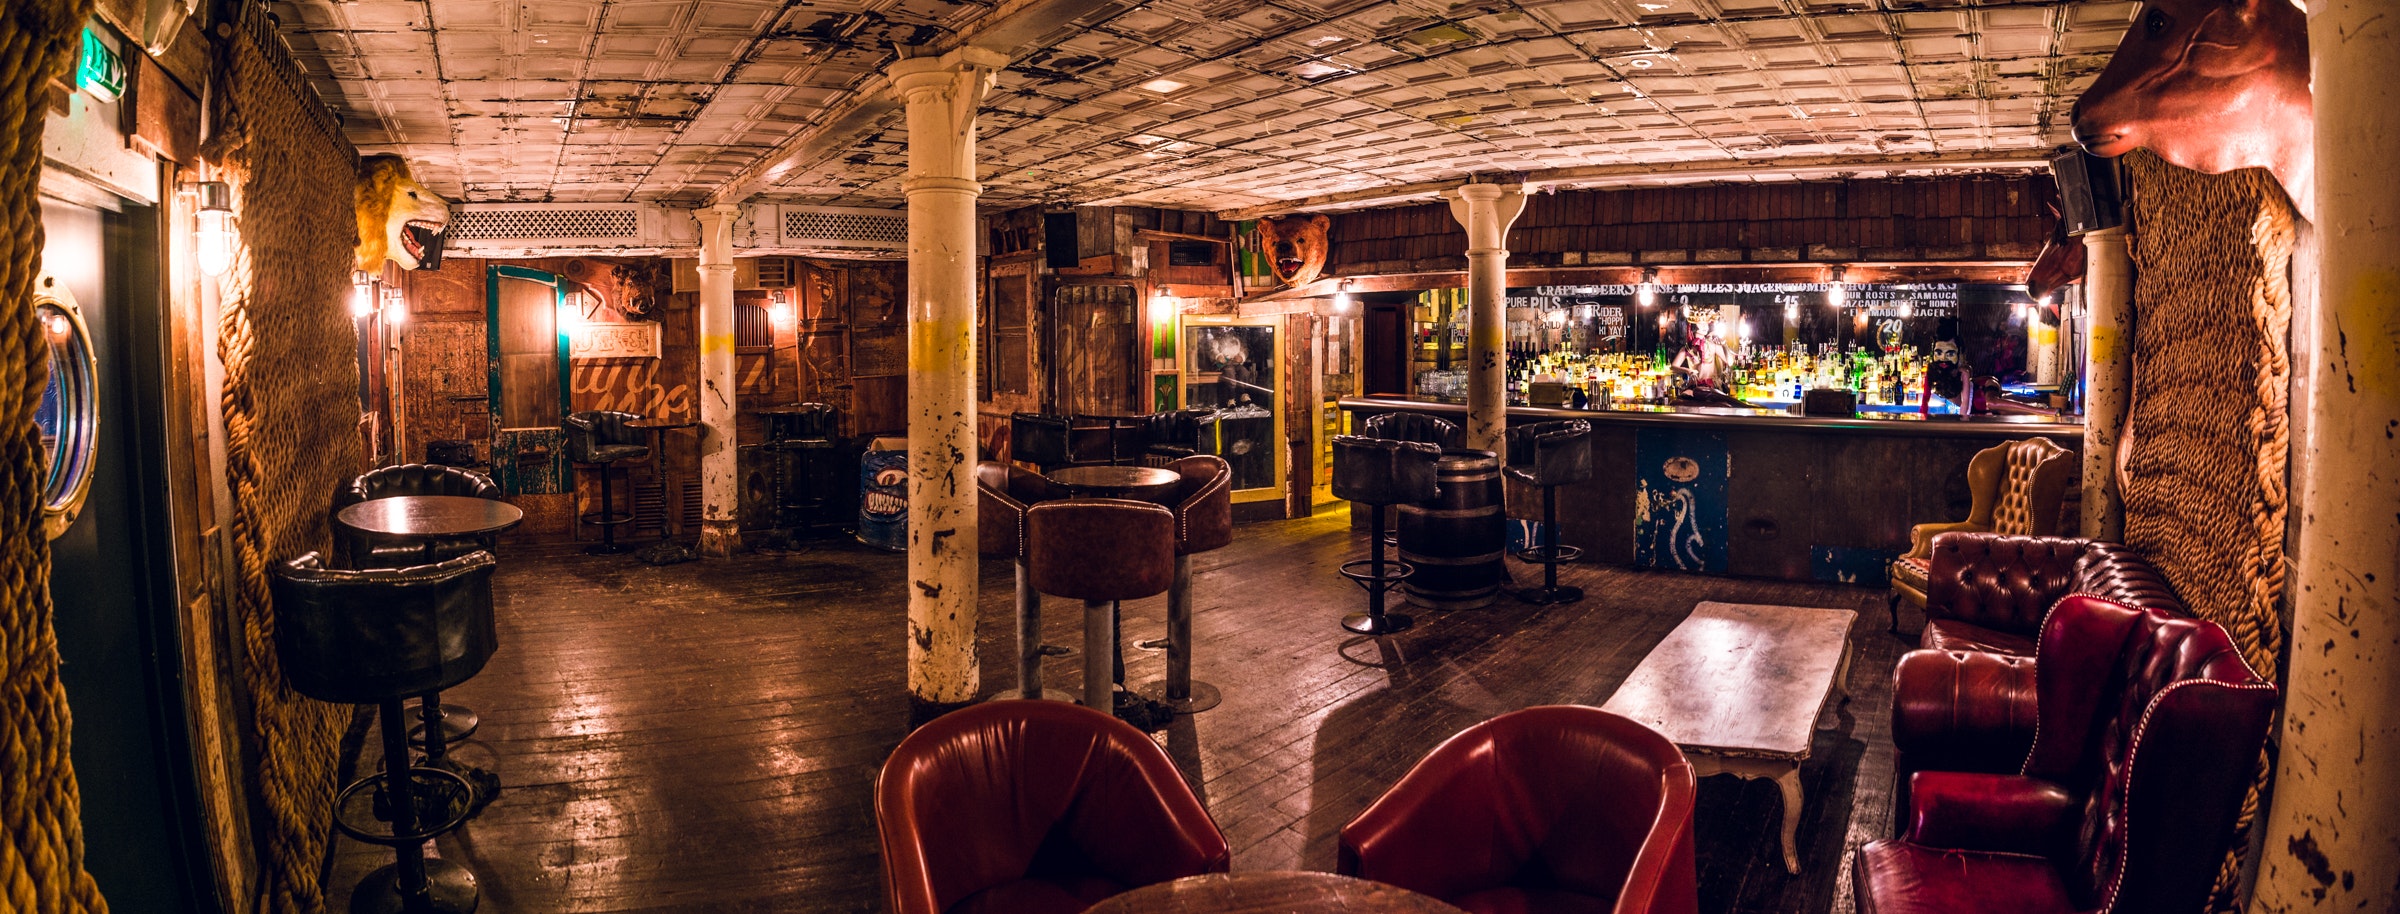 Birthday Party Venues in United Kingdom - The Blues Kitchen Shoreditch 